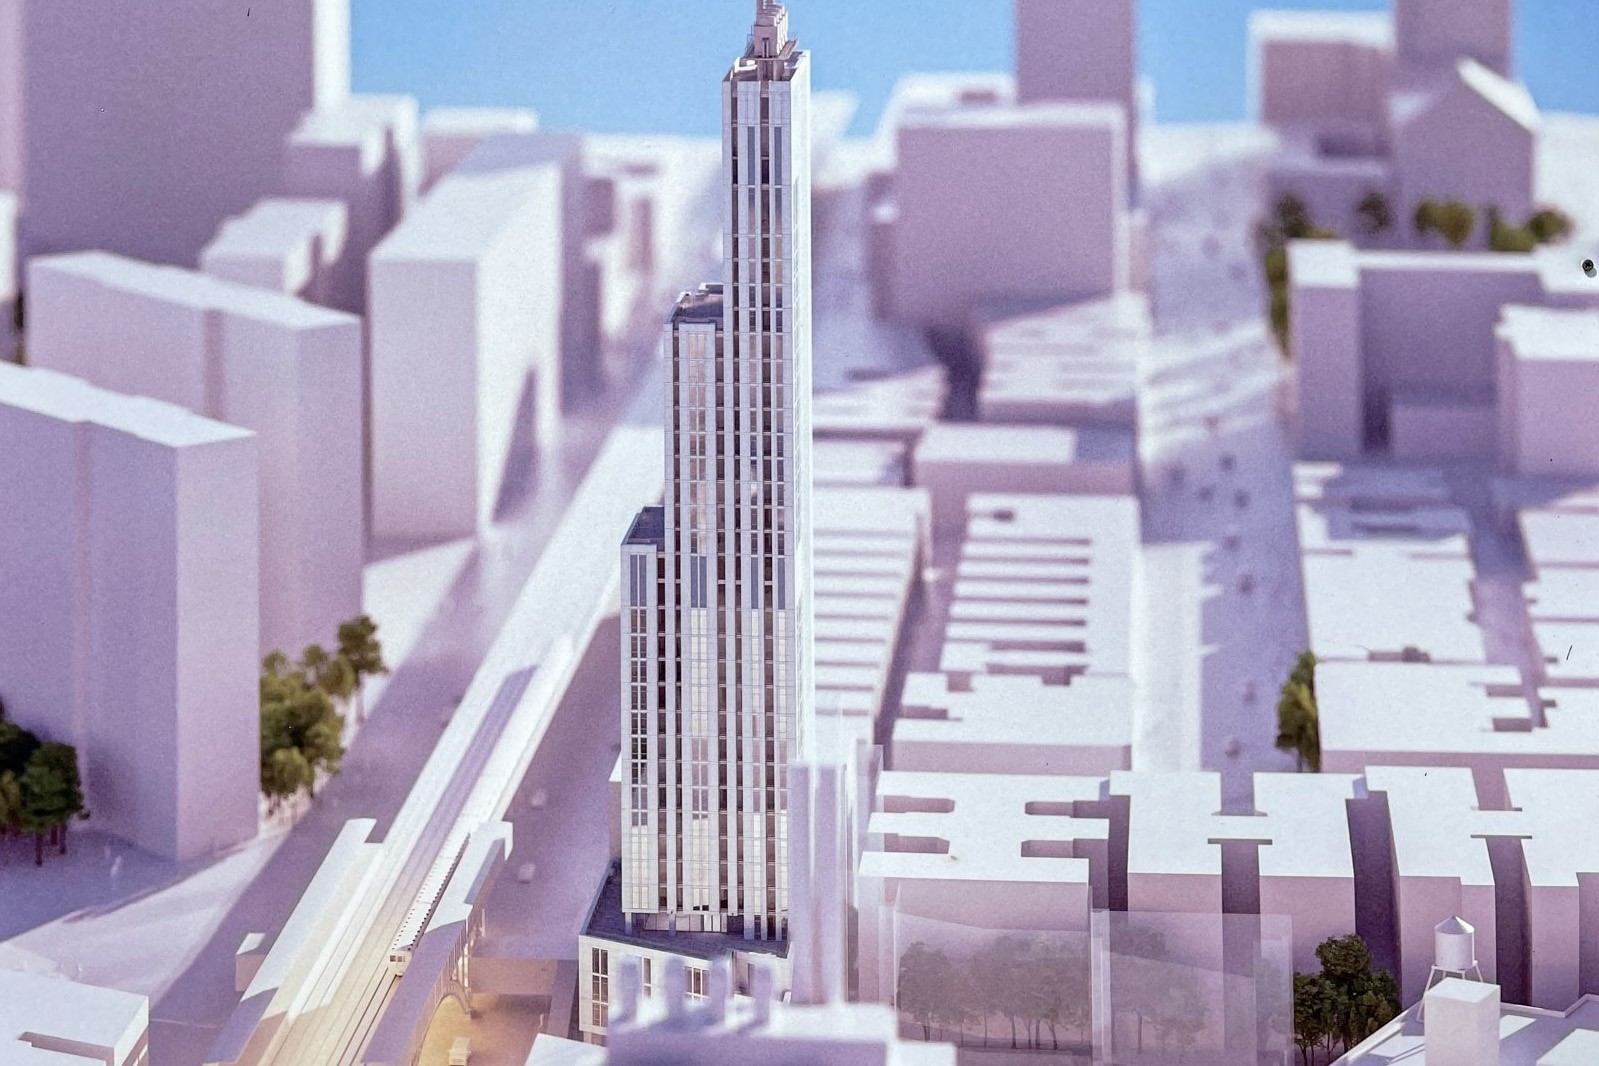 An aerial rendering of the 34-story building at 600 W. 125th Street, looking south.